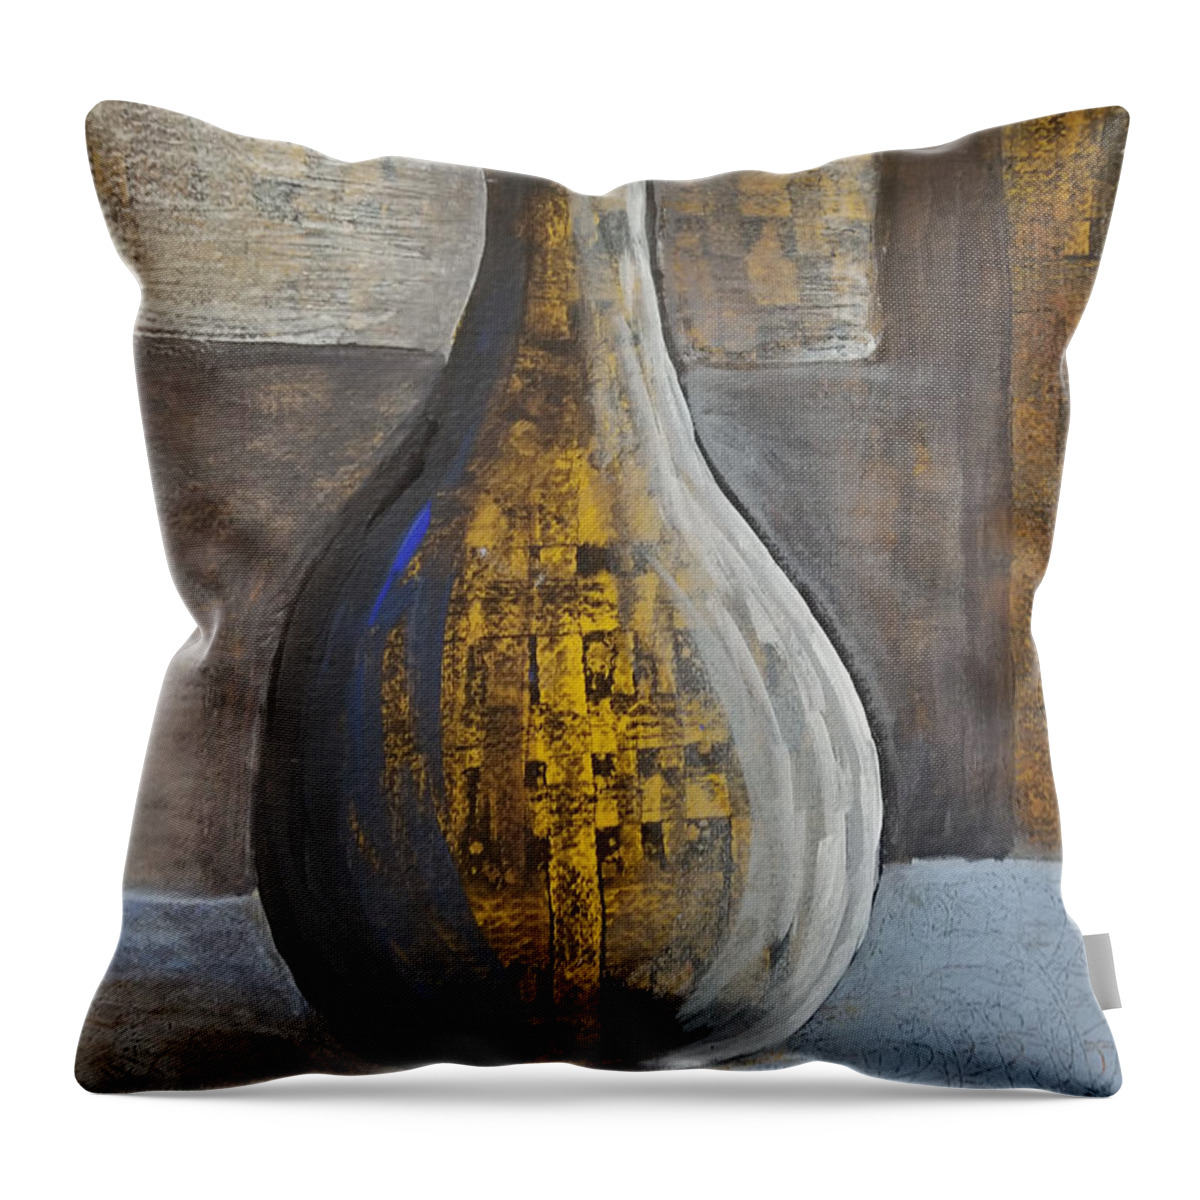 Vase Throw Pillow featuring the painting Lonely by Elise Boam